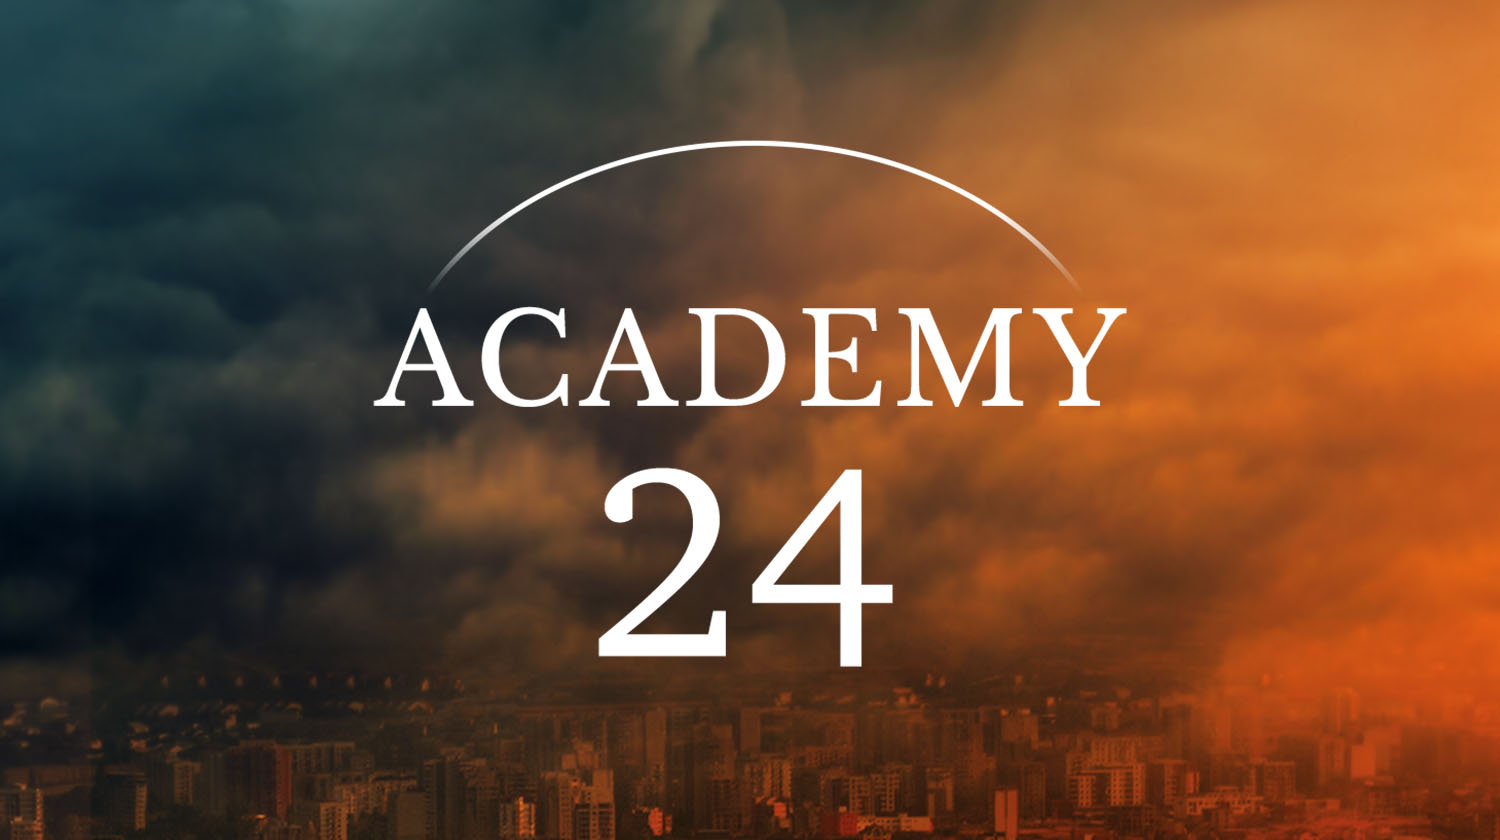 About Academy 24